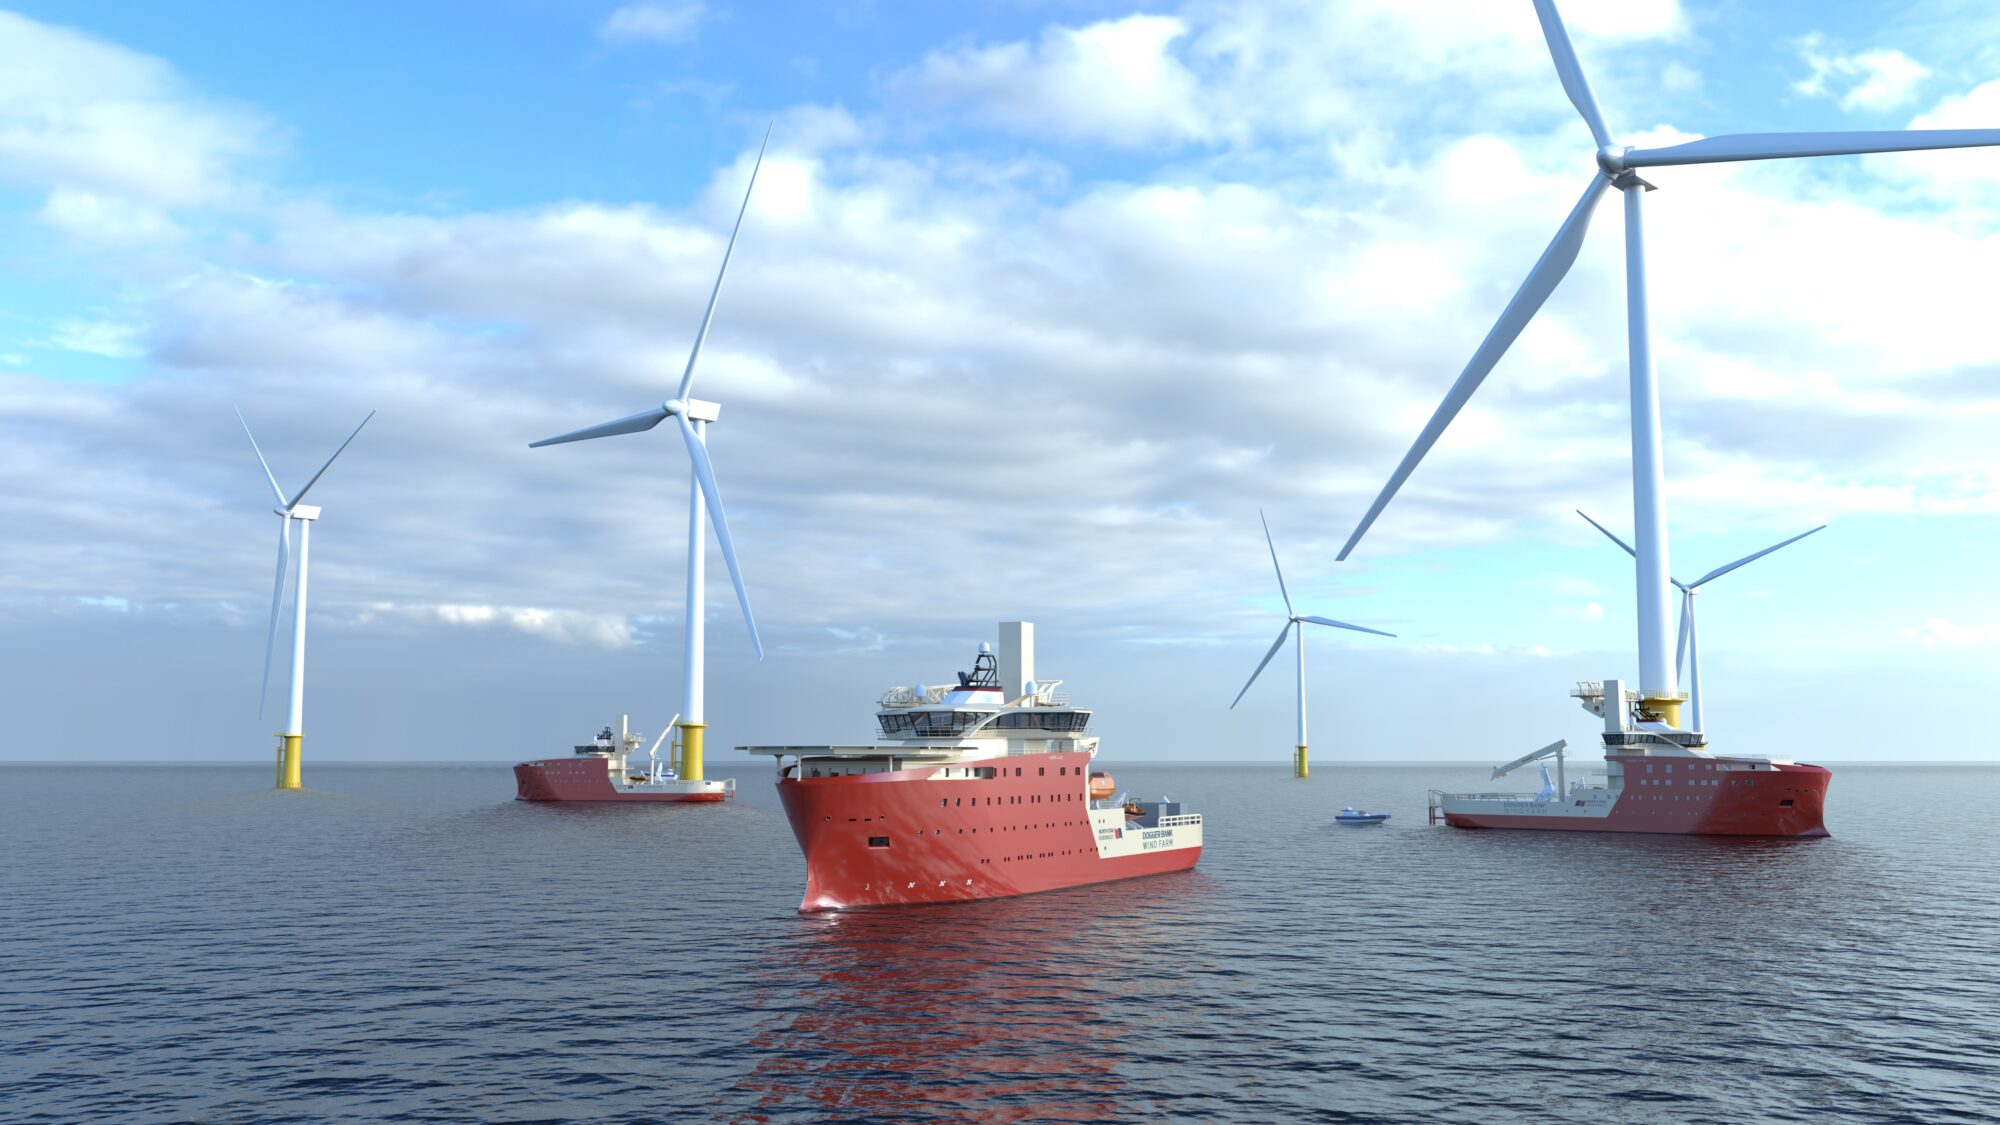 VARD to Design and Build Three SOVs for Dogger Bank Wind Farm